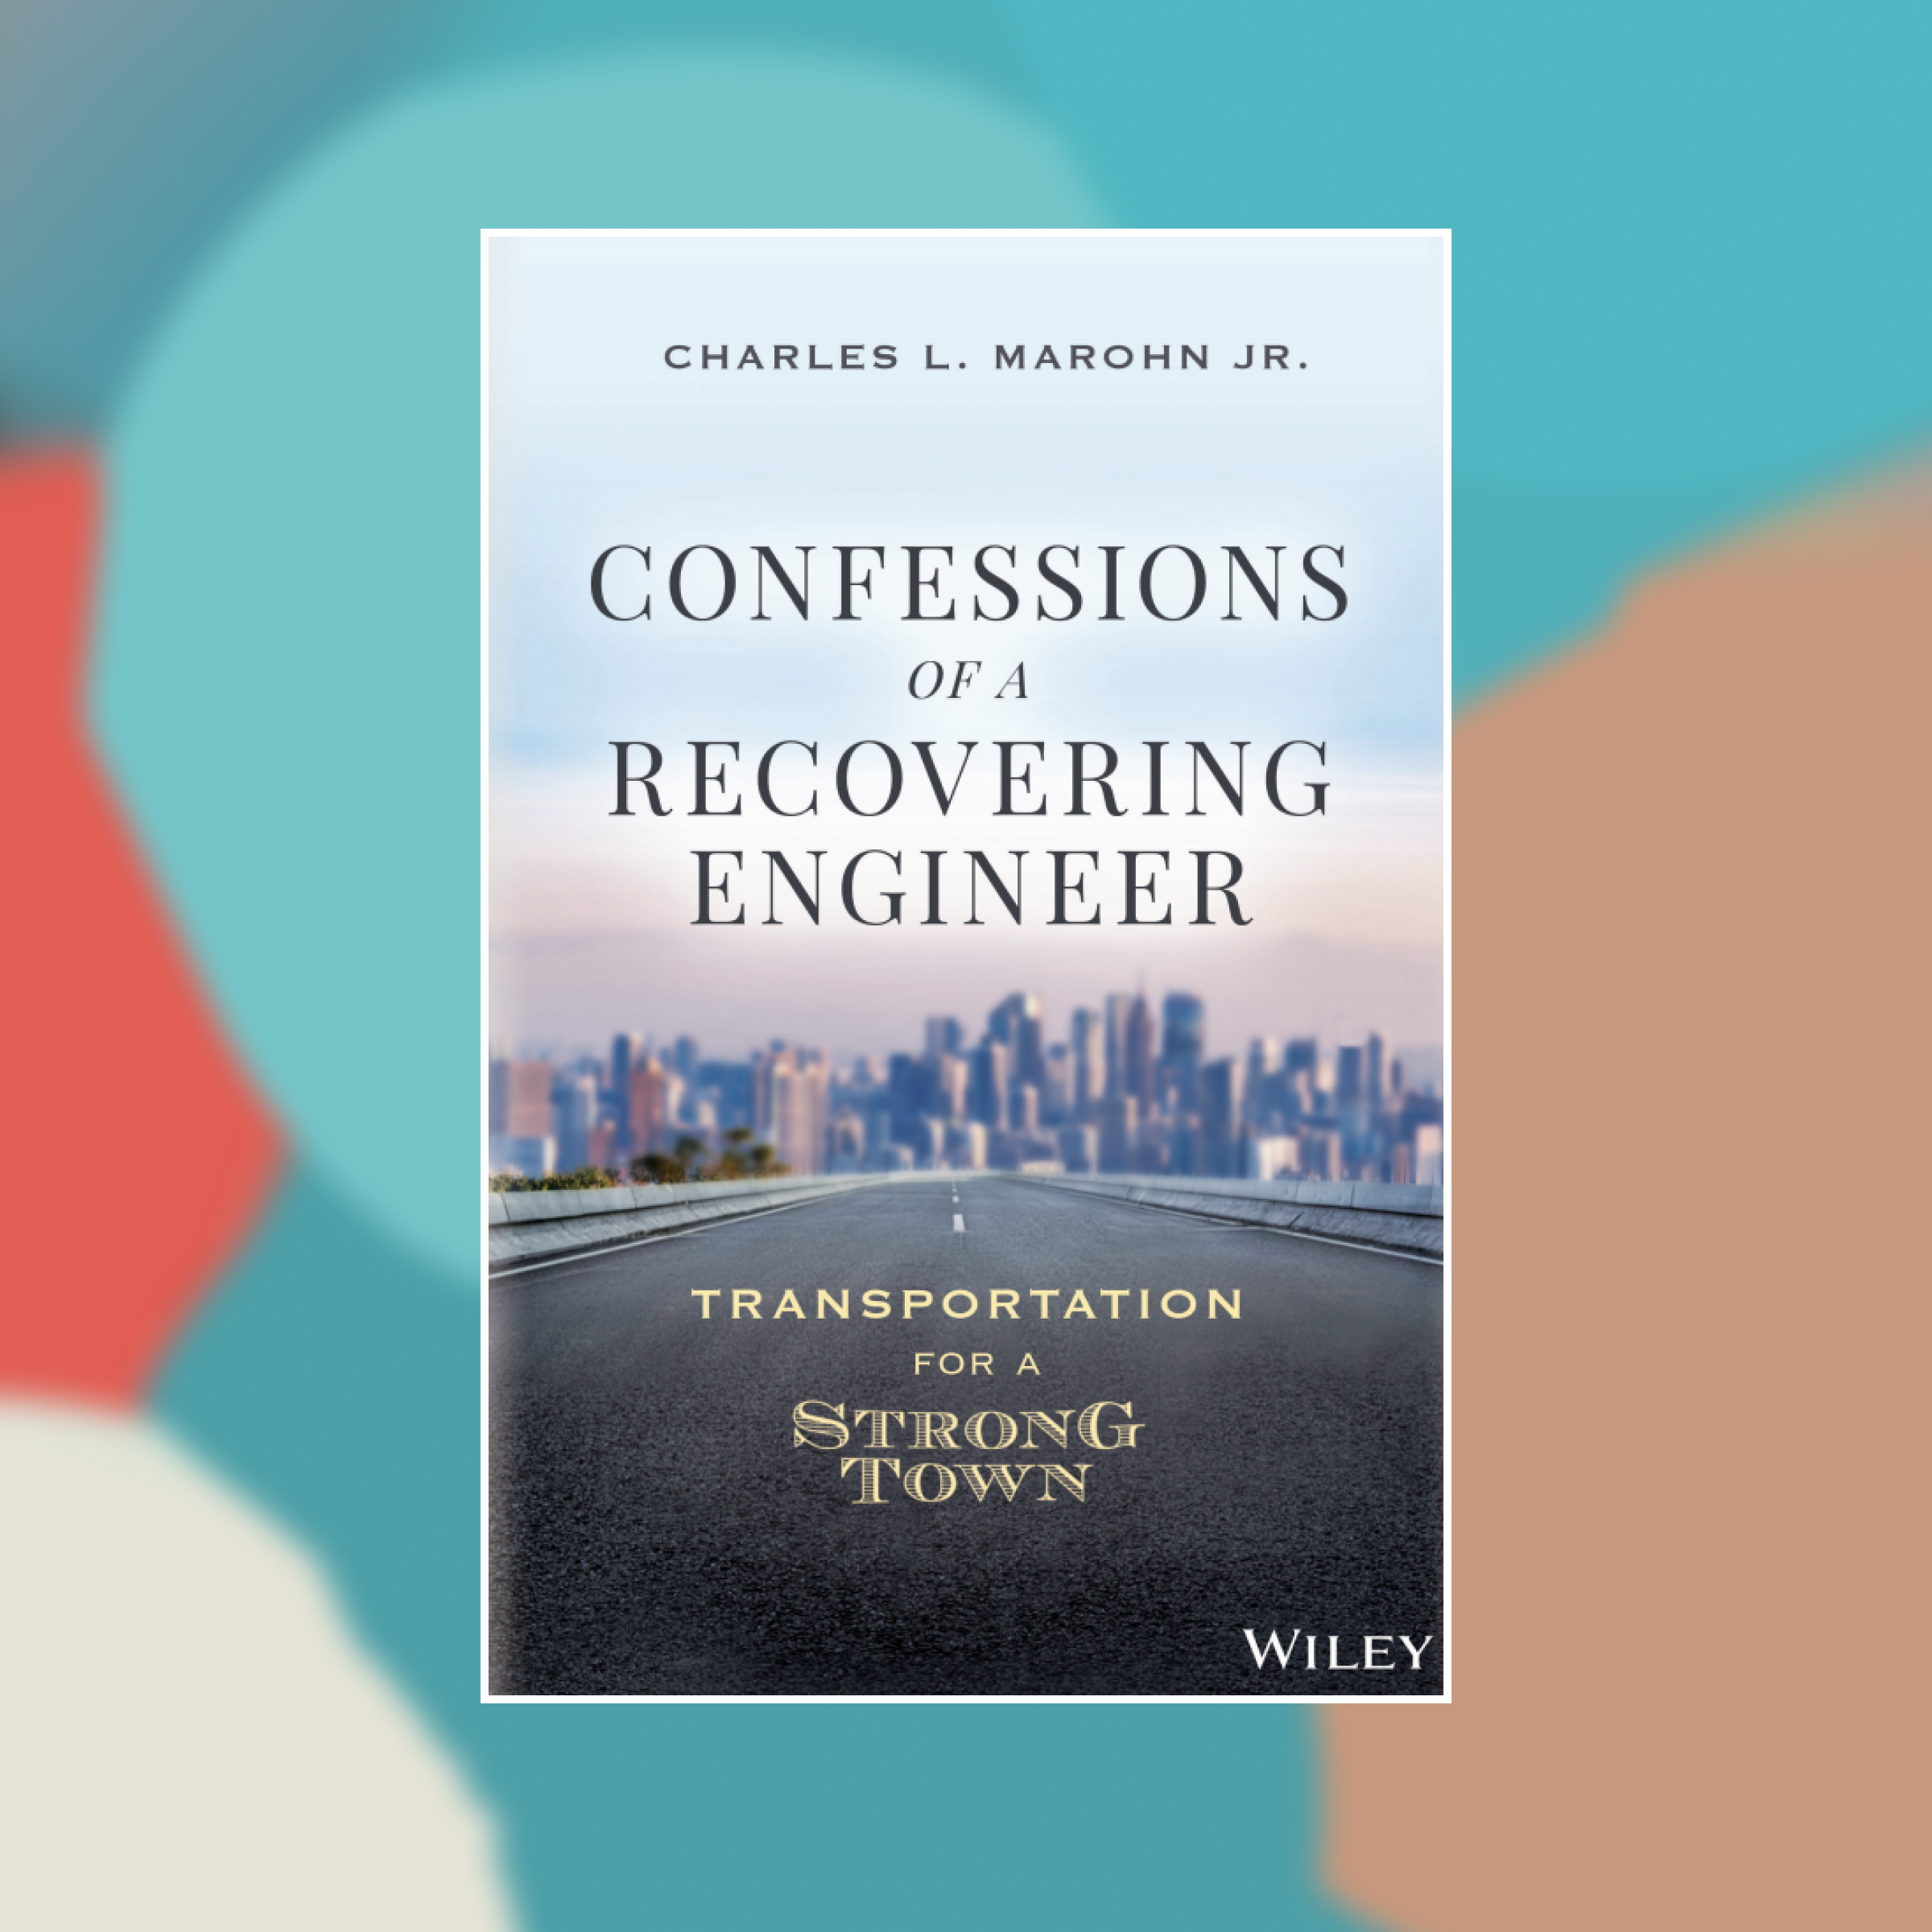 Book cover of Confessions of a Recovering Engineer against an abstract painted background